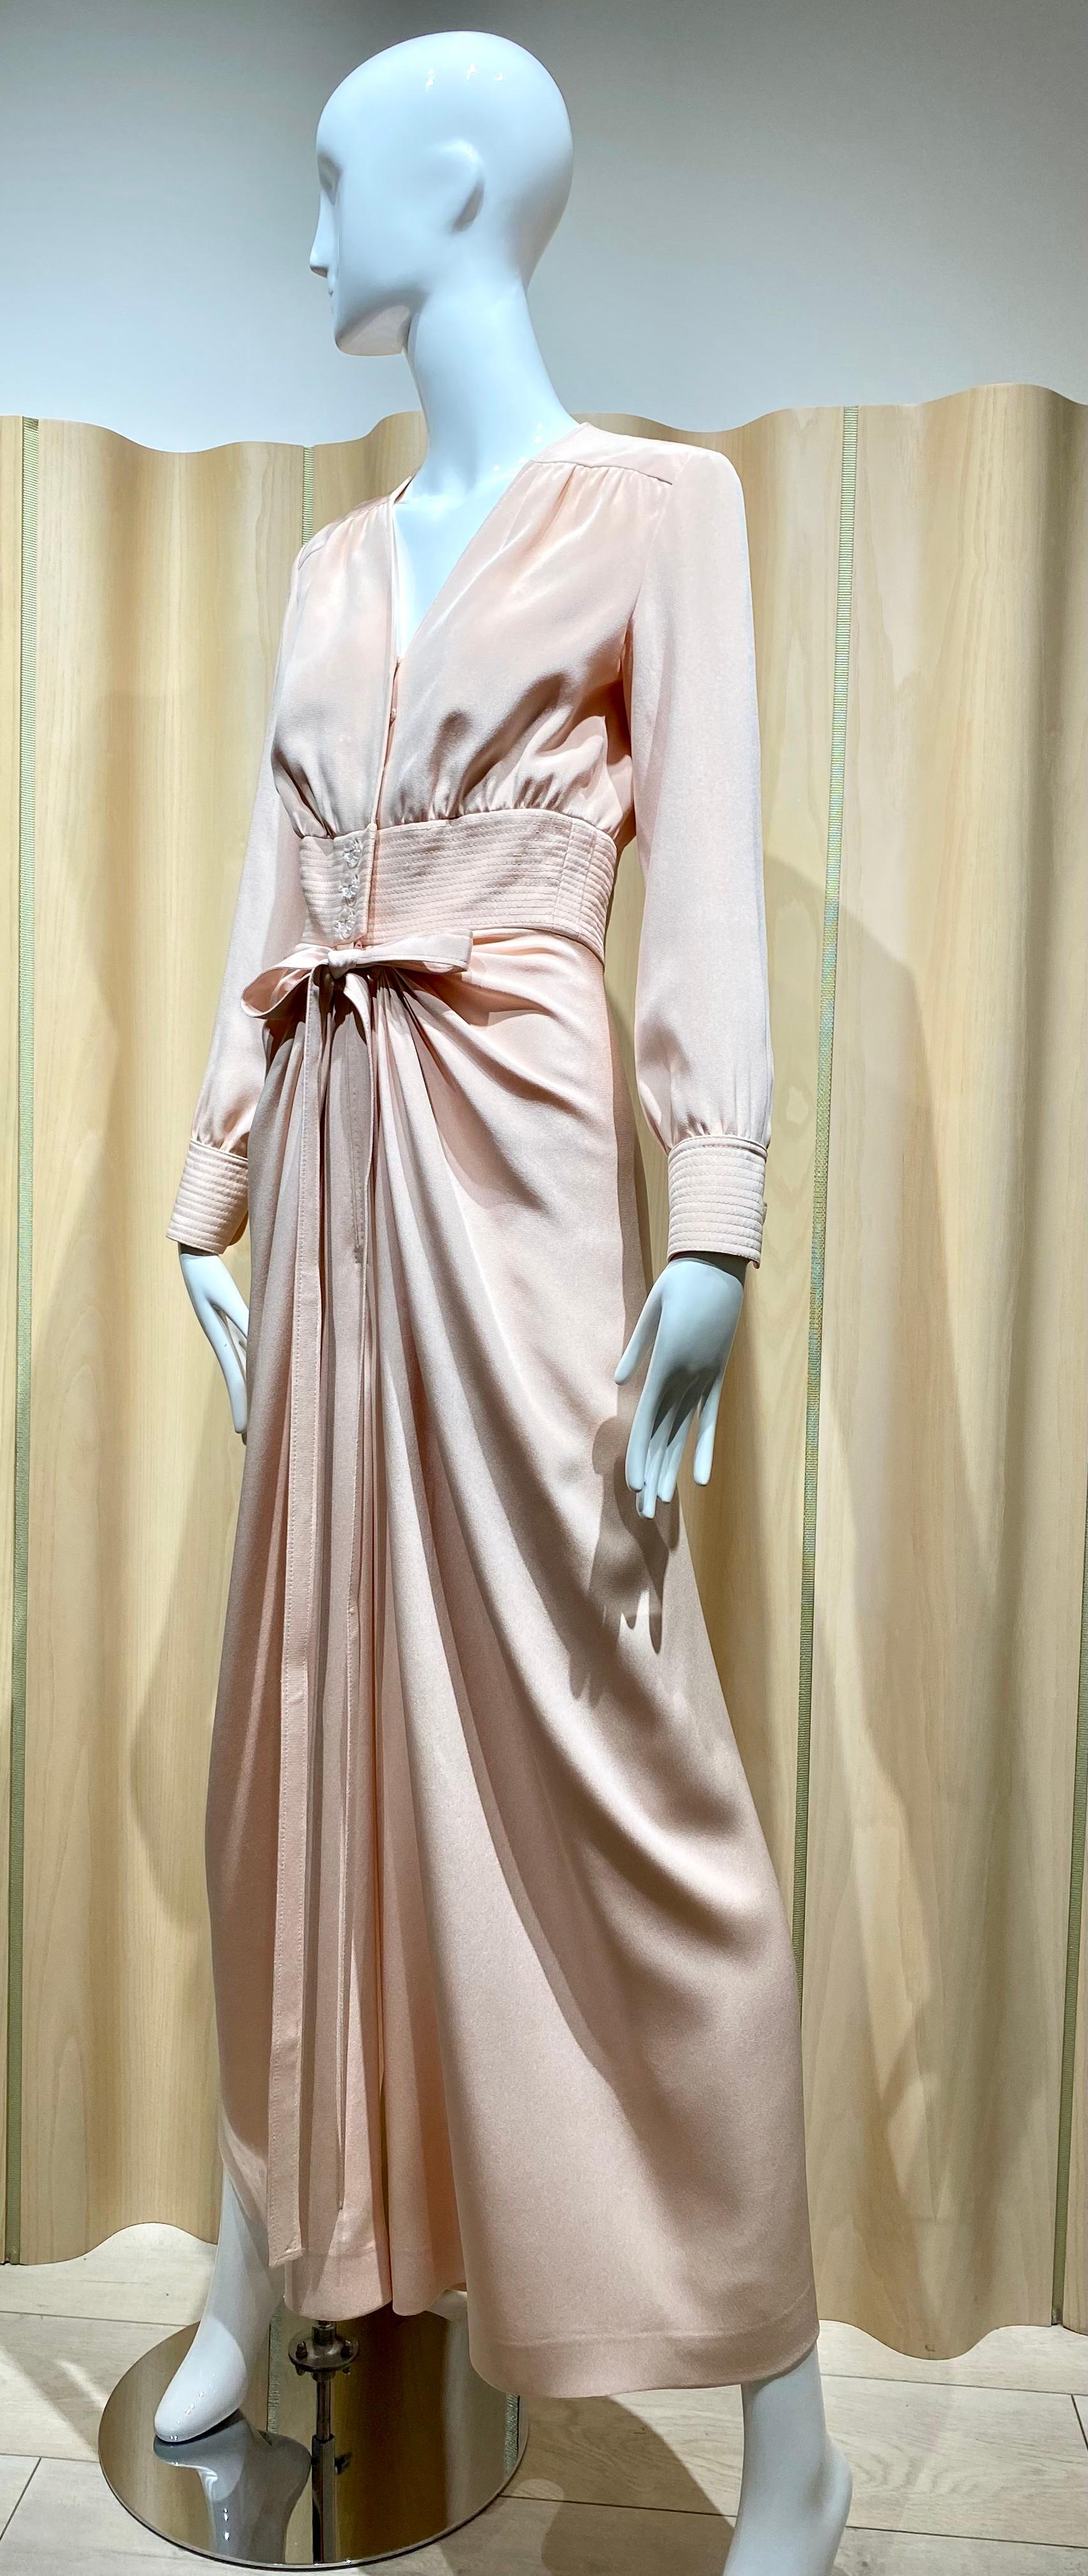 Vintage Galanos from Amelia Gray Boutique Light Pink long sleeve crepe jumpsuit.
Size: 2 or 4 / Small
Measurement:
Bust: 34” / Waist: 25” /Hip: 38” / Sleeve length: 23” / Inseam:26”